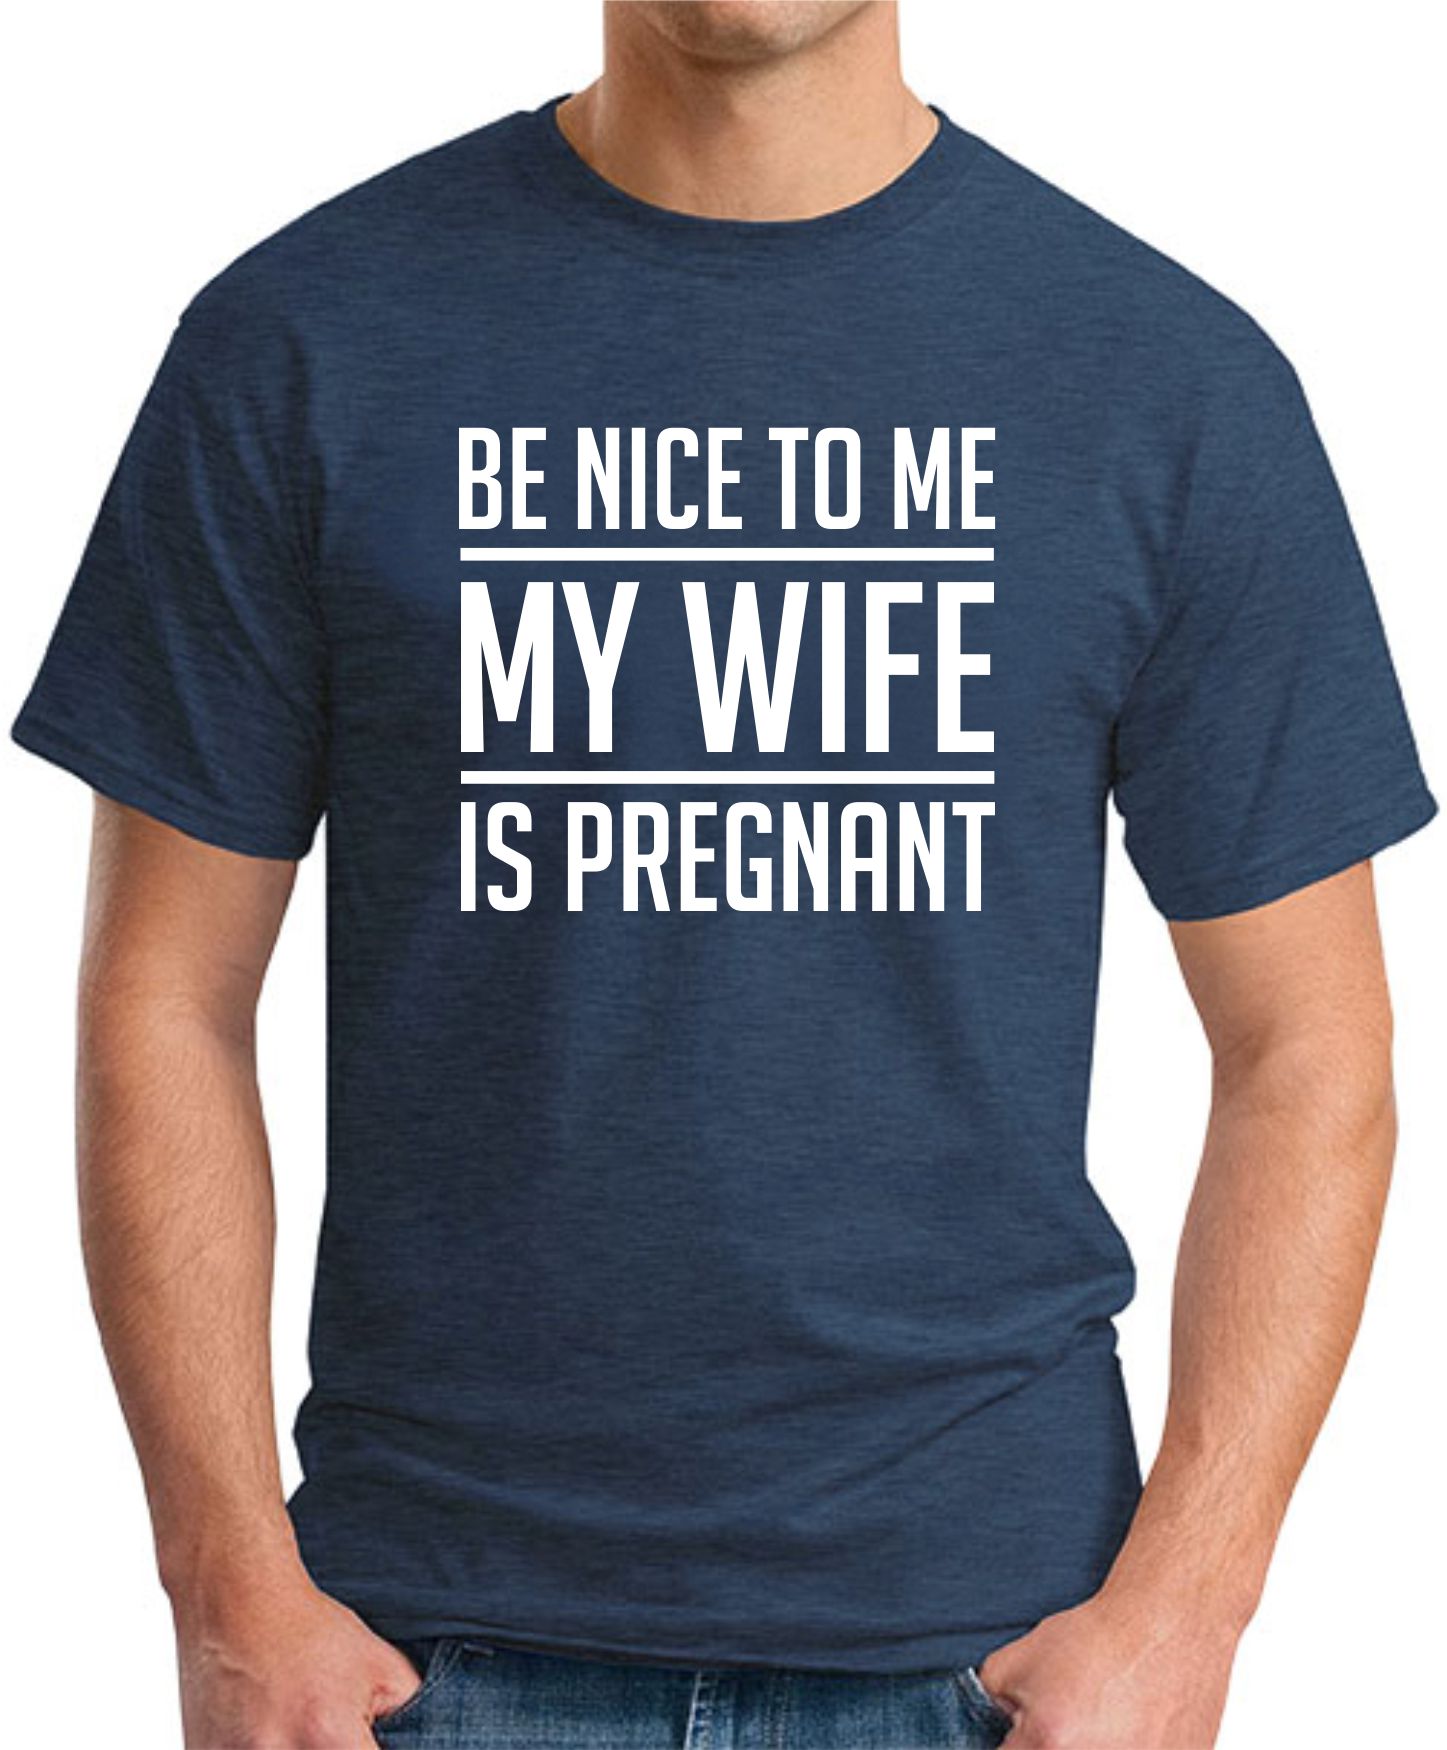 BE NICE TO ME MY WIFE IS PREGNANT T-SHIRT - GeekyTees